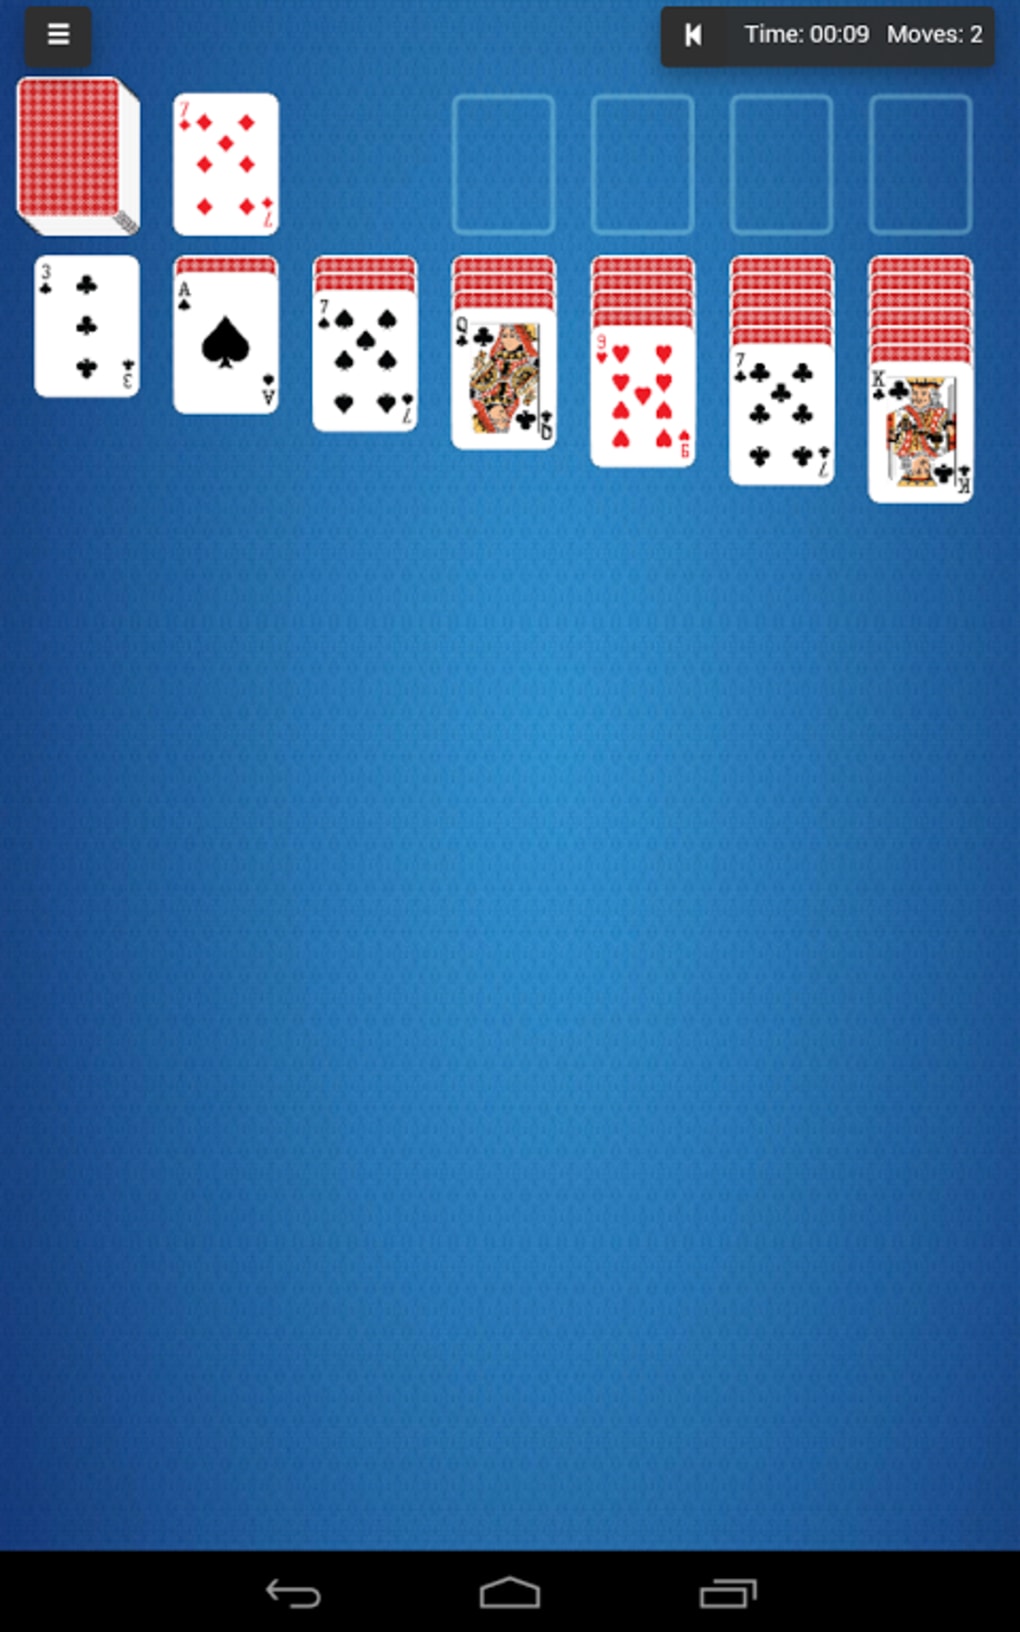 SOLITAIRE: KLONDIKE SPIDER FREECELL free online game on